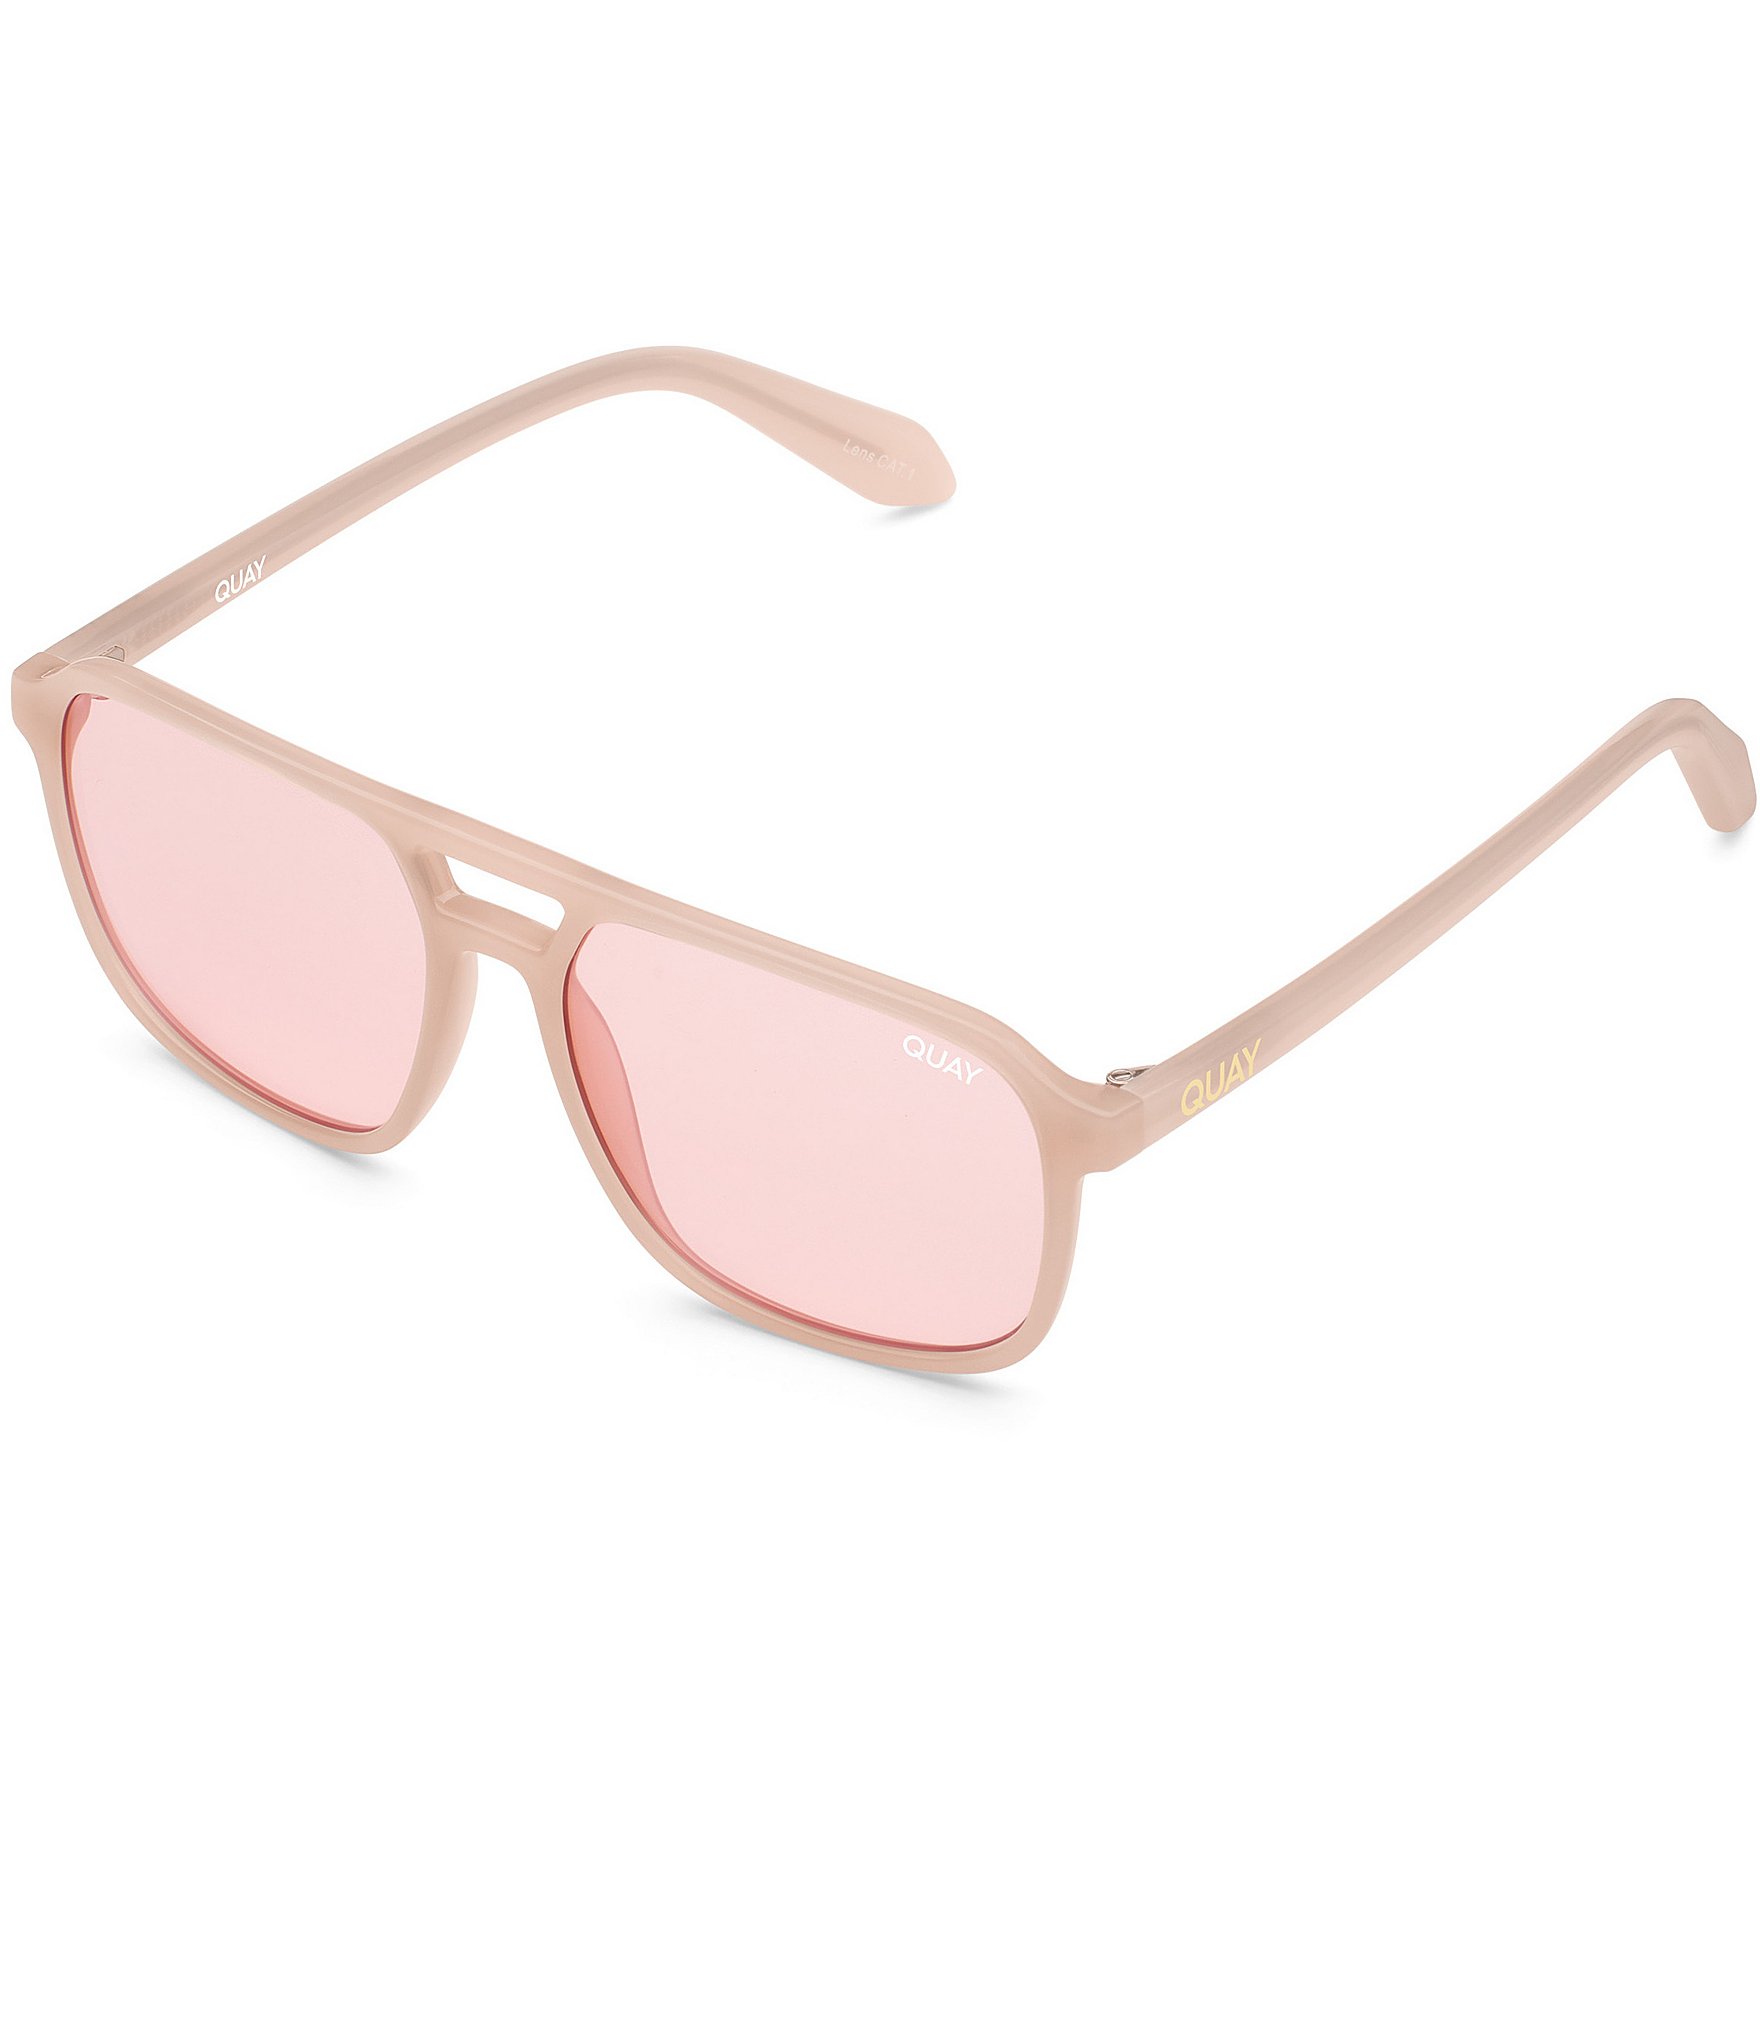 FLY GIRL SUNGLASSES - M'Squared Beauty Supply